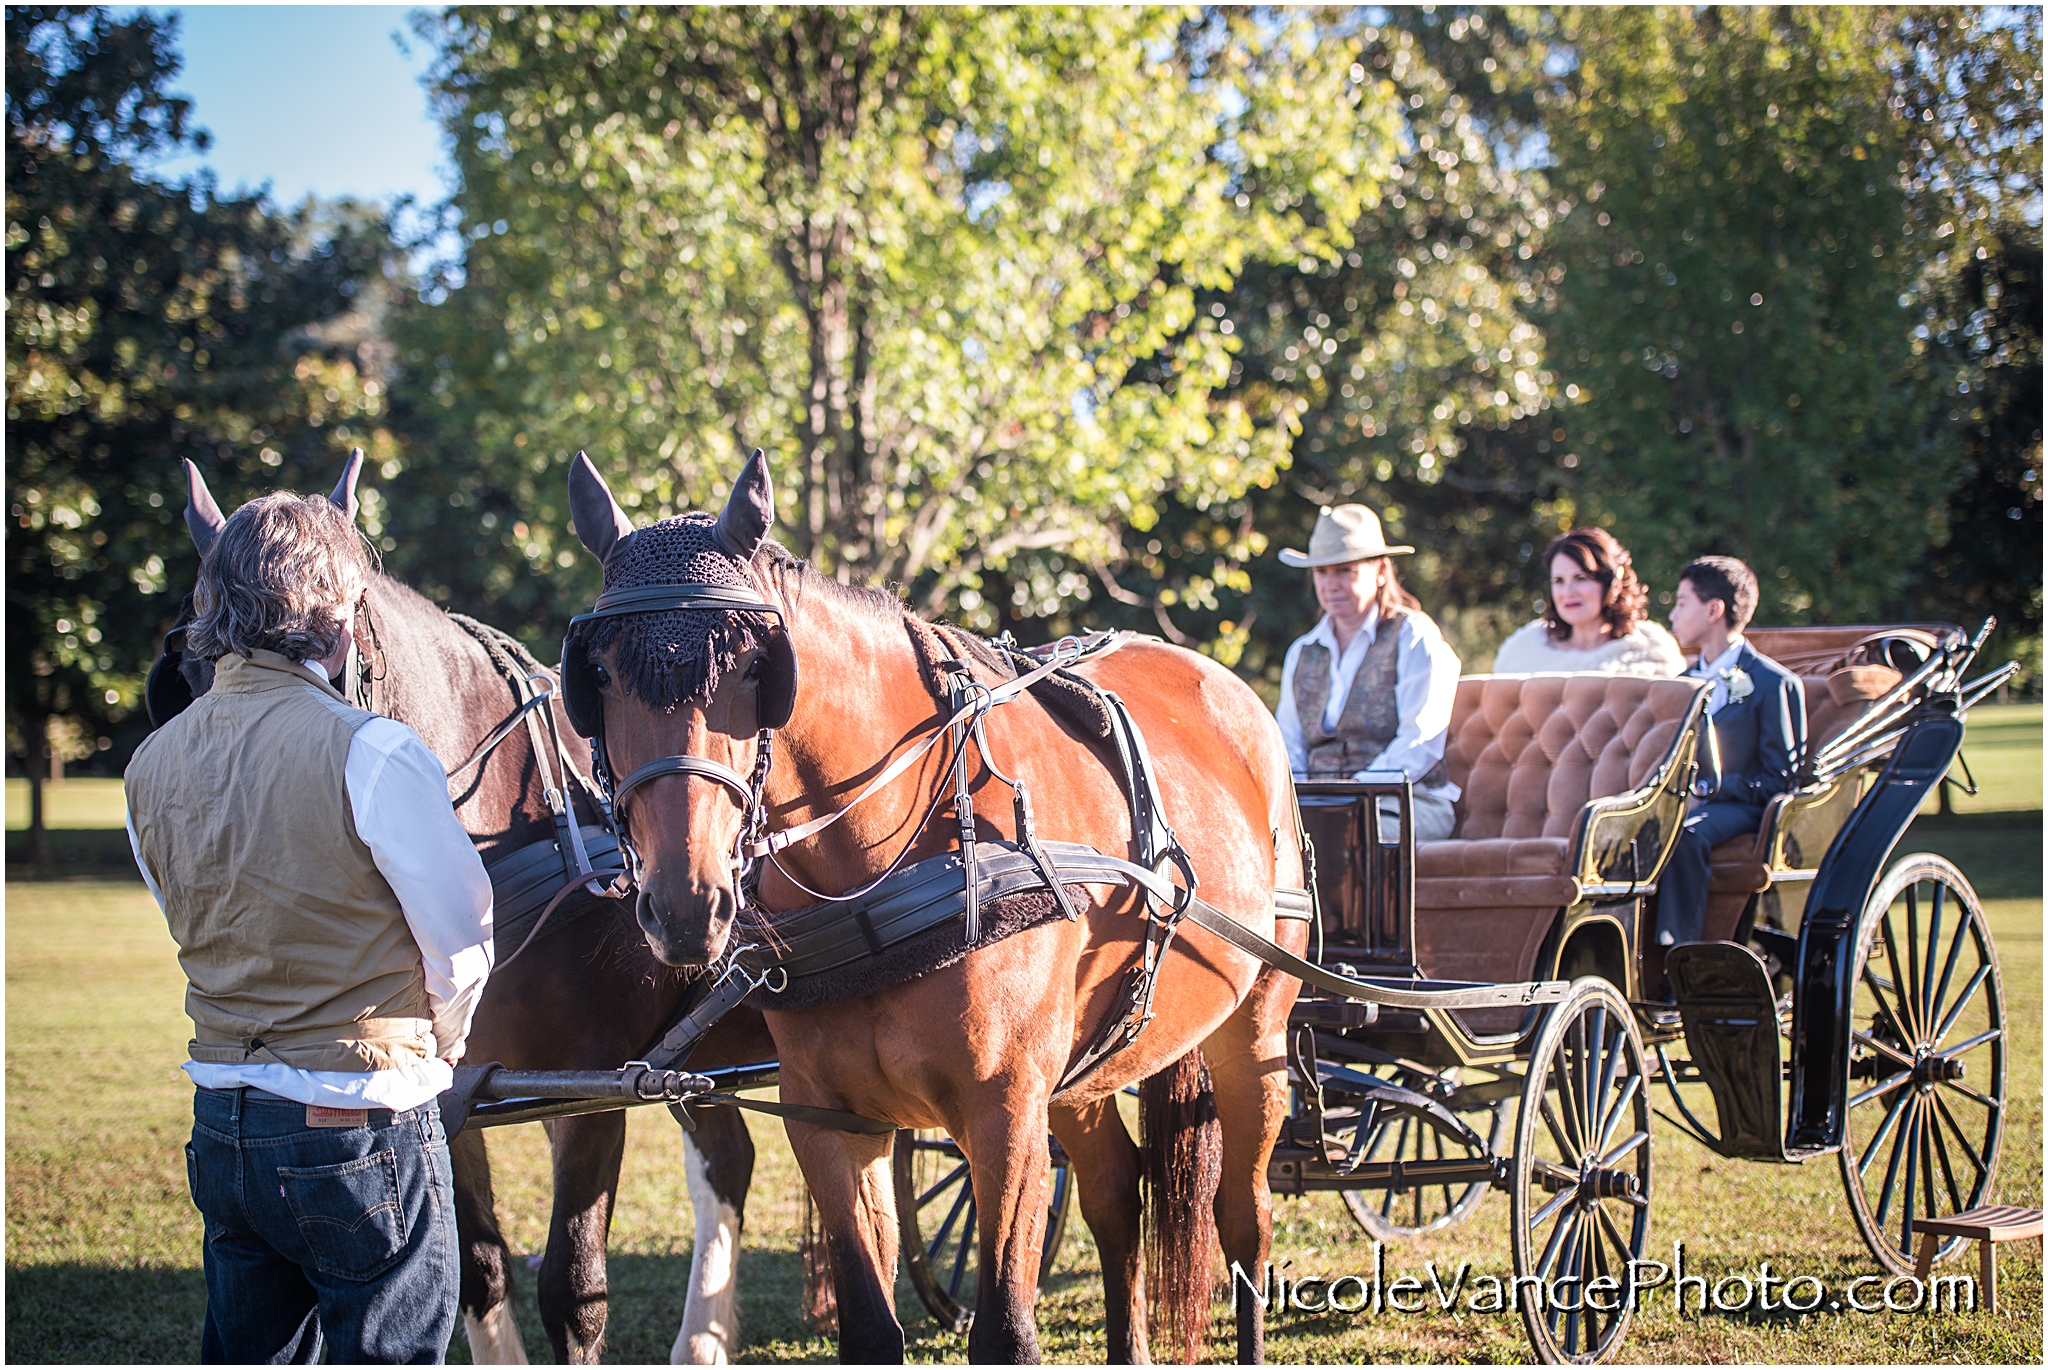 The bride and her son enjoy a horse drawn carriage ride to the wedding ceremony at Maymont Park in Richmond Virginia.